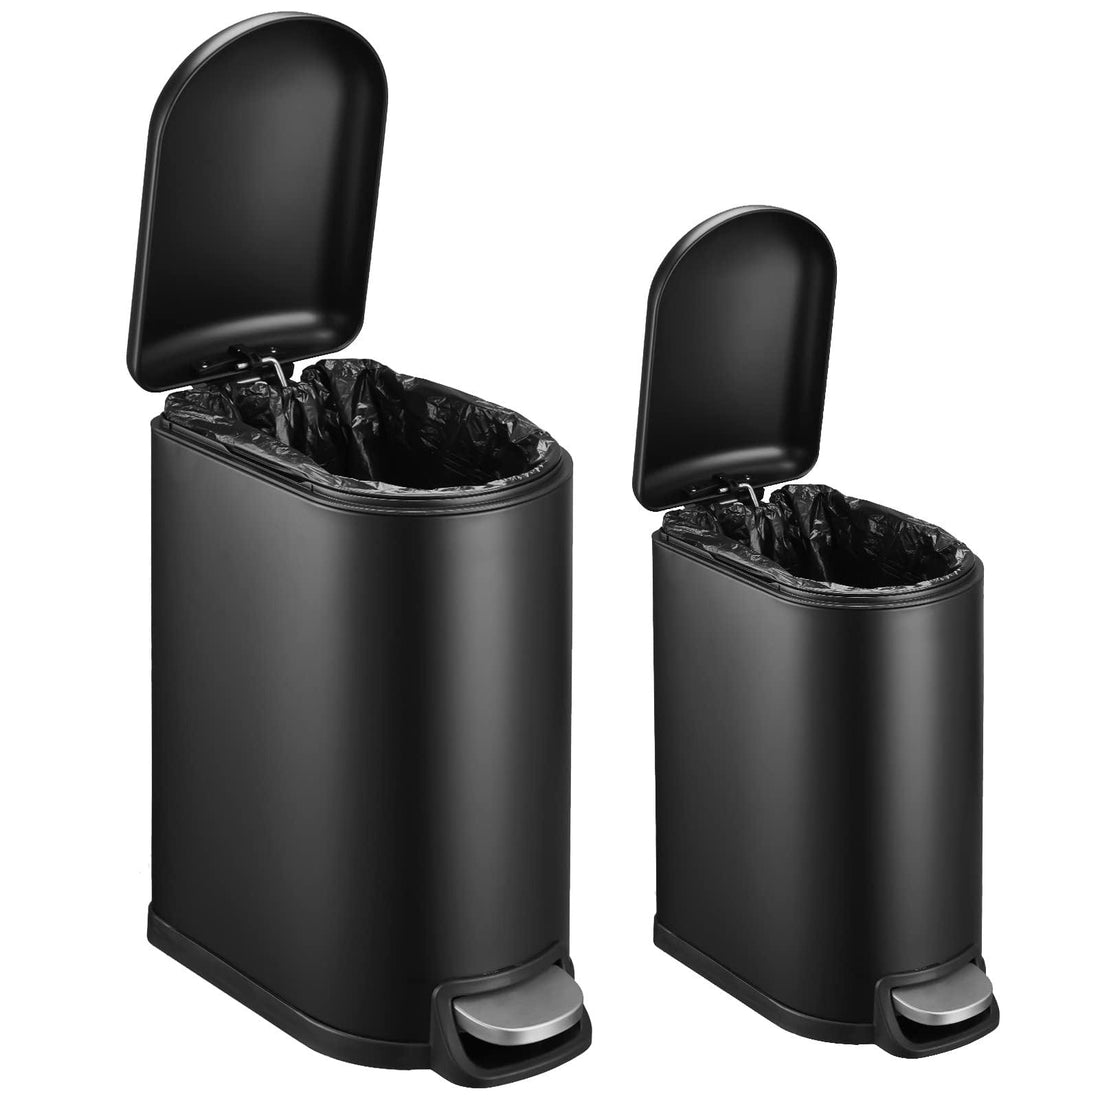 10.6 & 2.6 Gal Stainless Steel Trash Can Combo, Bathroom Set